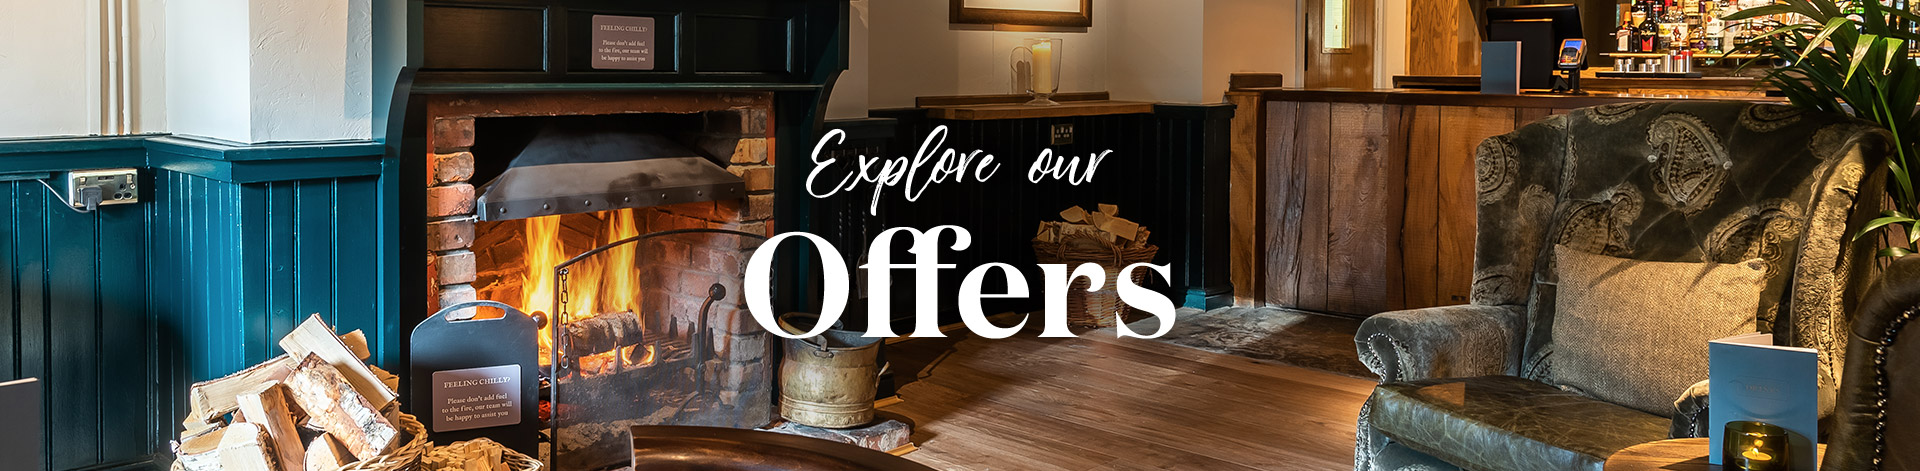 Our latest offers at The White Horse